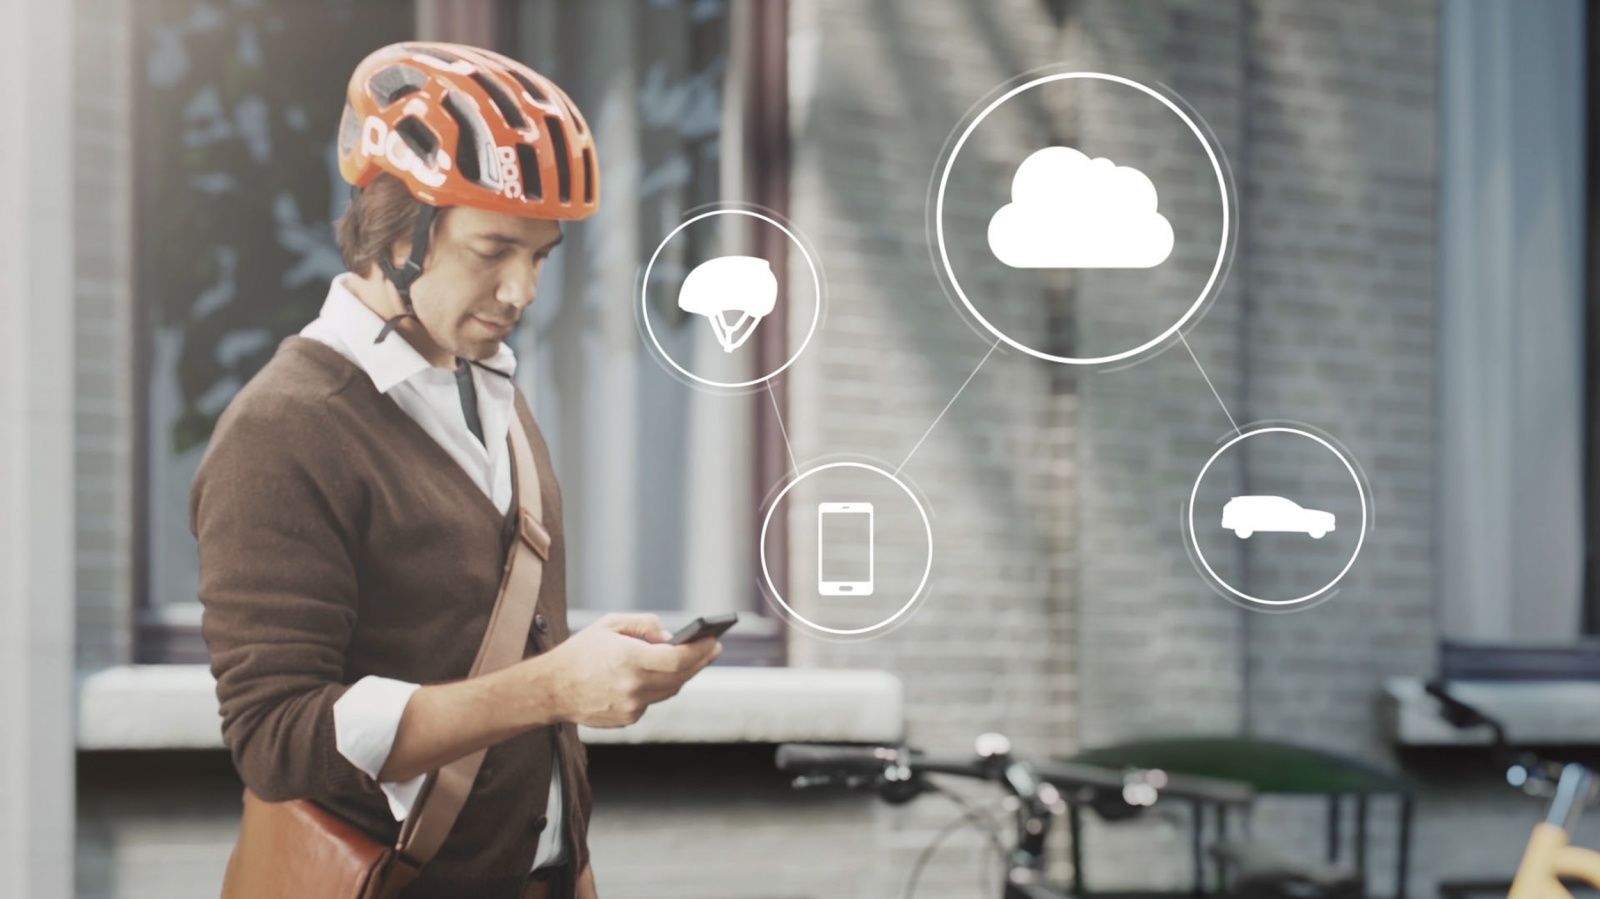 Swedish companies Volvo and POC have developed cloud-based safety technology that will alert cyclists and motorists when a collision is possible. (Photo from Volvo)